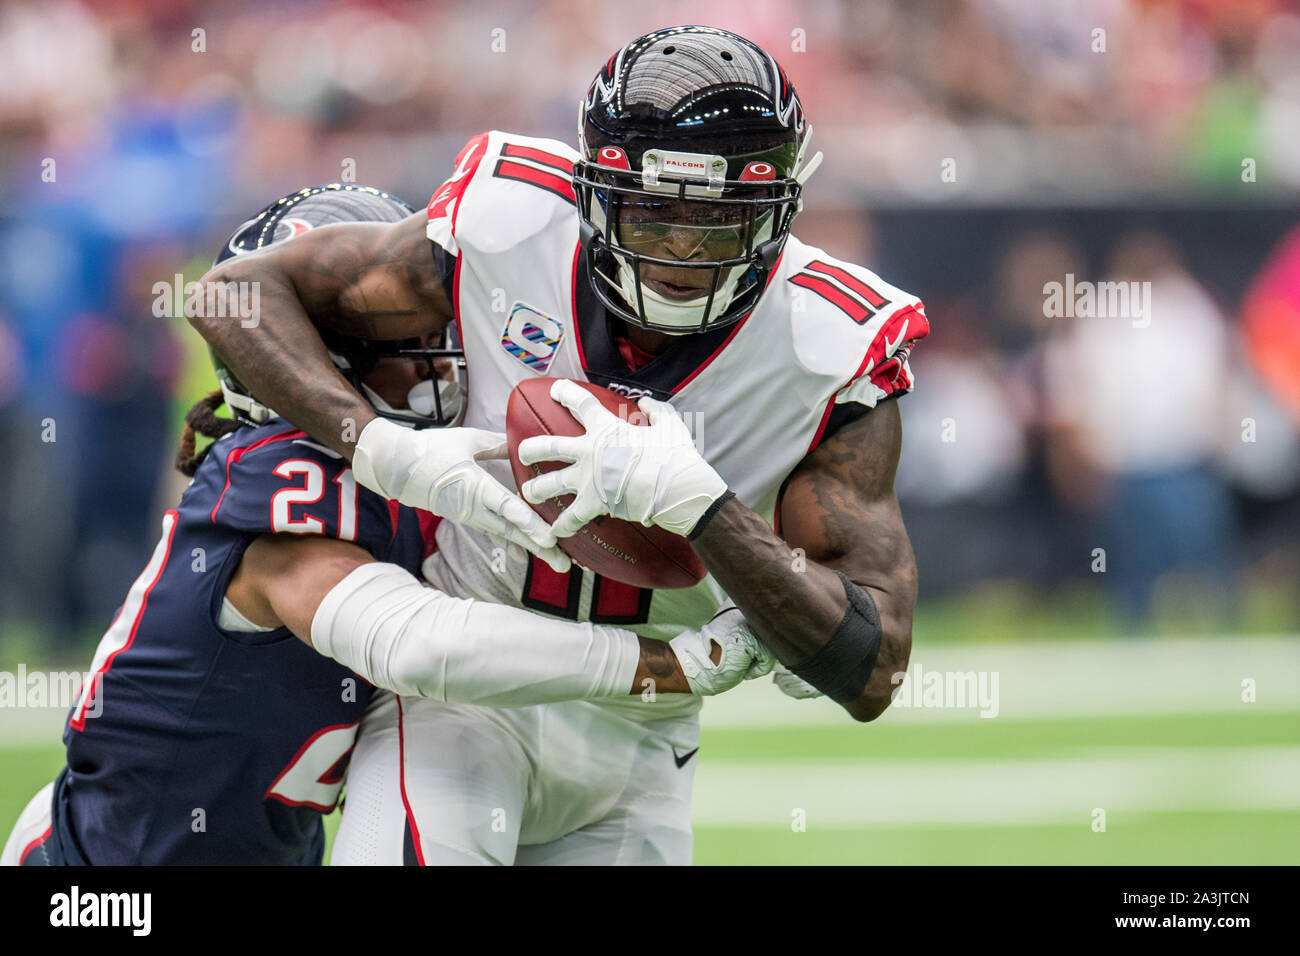 Houston, TX, USA. 6th Oct, 2019. Atlanta Falcons wide receiver Julio Jones (11) is tackled by Houston Texans cornerback Bradley Roby (21) during the 1st quarter of an NFL football game between the Houston Texans and the Atlanta Falcons at NRG Stadium in Houston, TX. The Texans won the game 53 to 32.Trask Smith/CSM/Alamy Live News Stock Photo